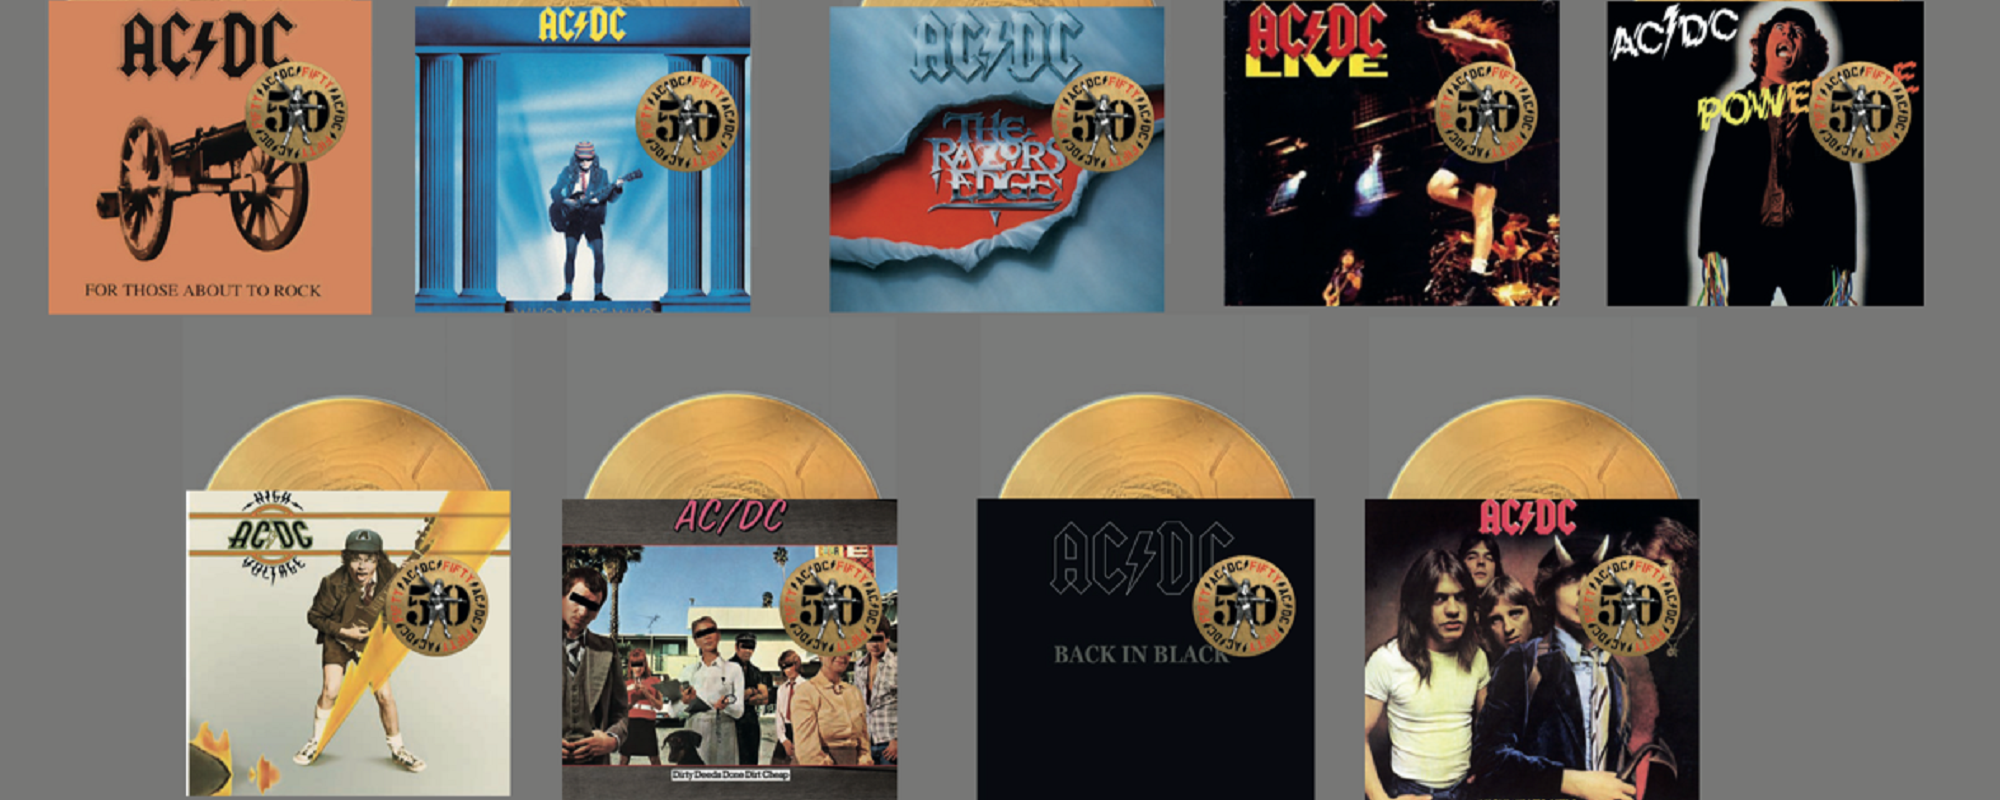 Back in Gold: AC/DC Celebrating 50th Anniversary by Reissuing Its Catalog on Gold Vinyl